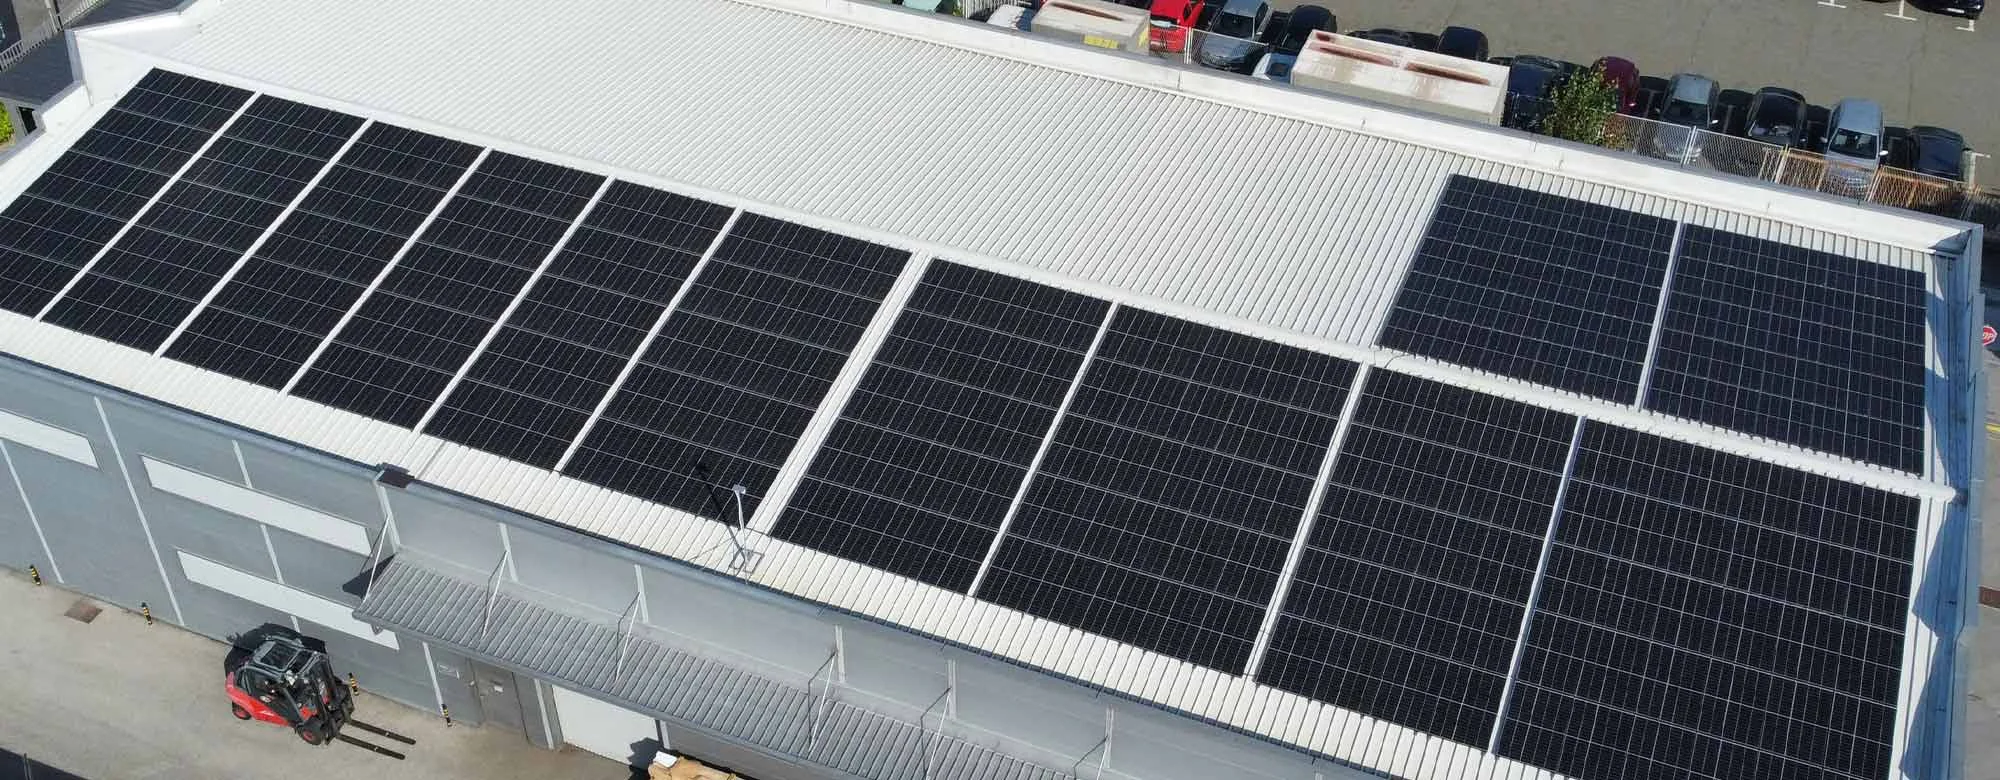 Aerial shot of factory roof with solar panels